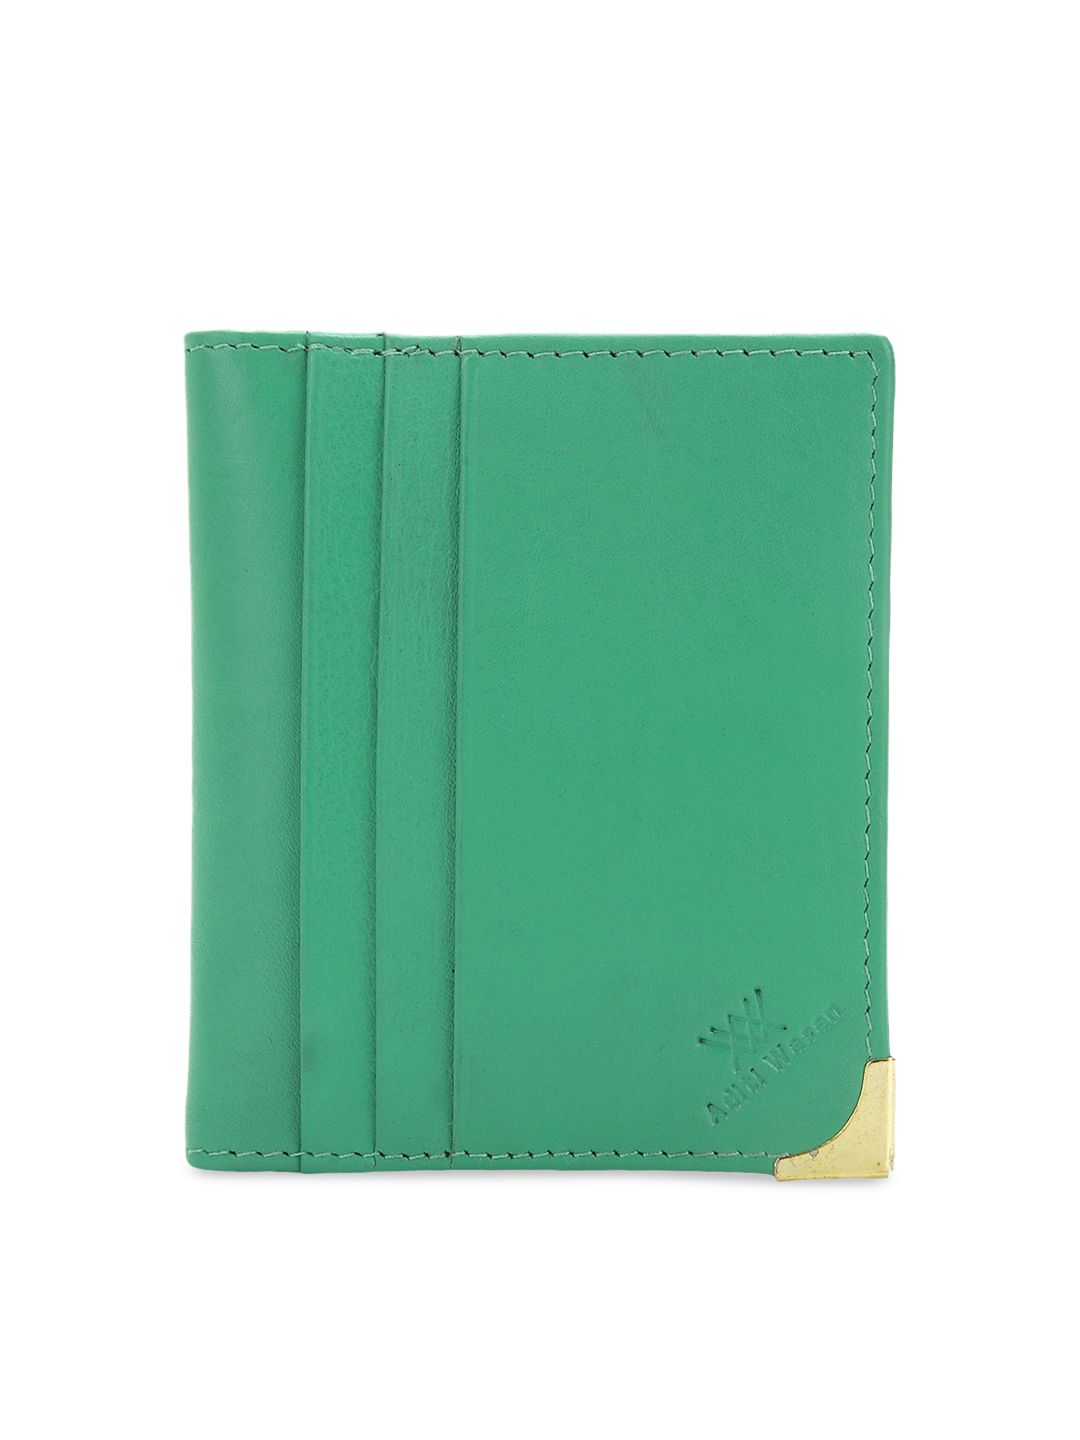 Aditi Wasan Unisex Green Solid Leather Card Holder Price in India